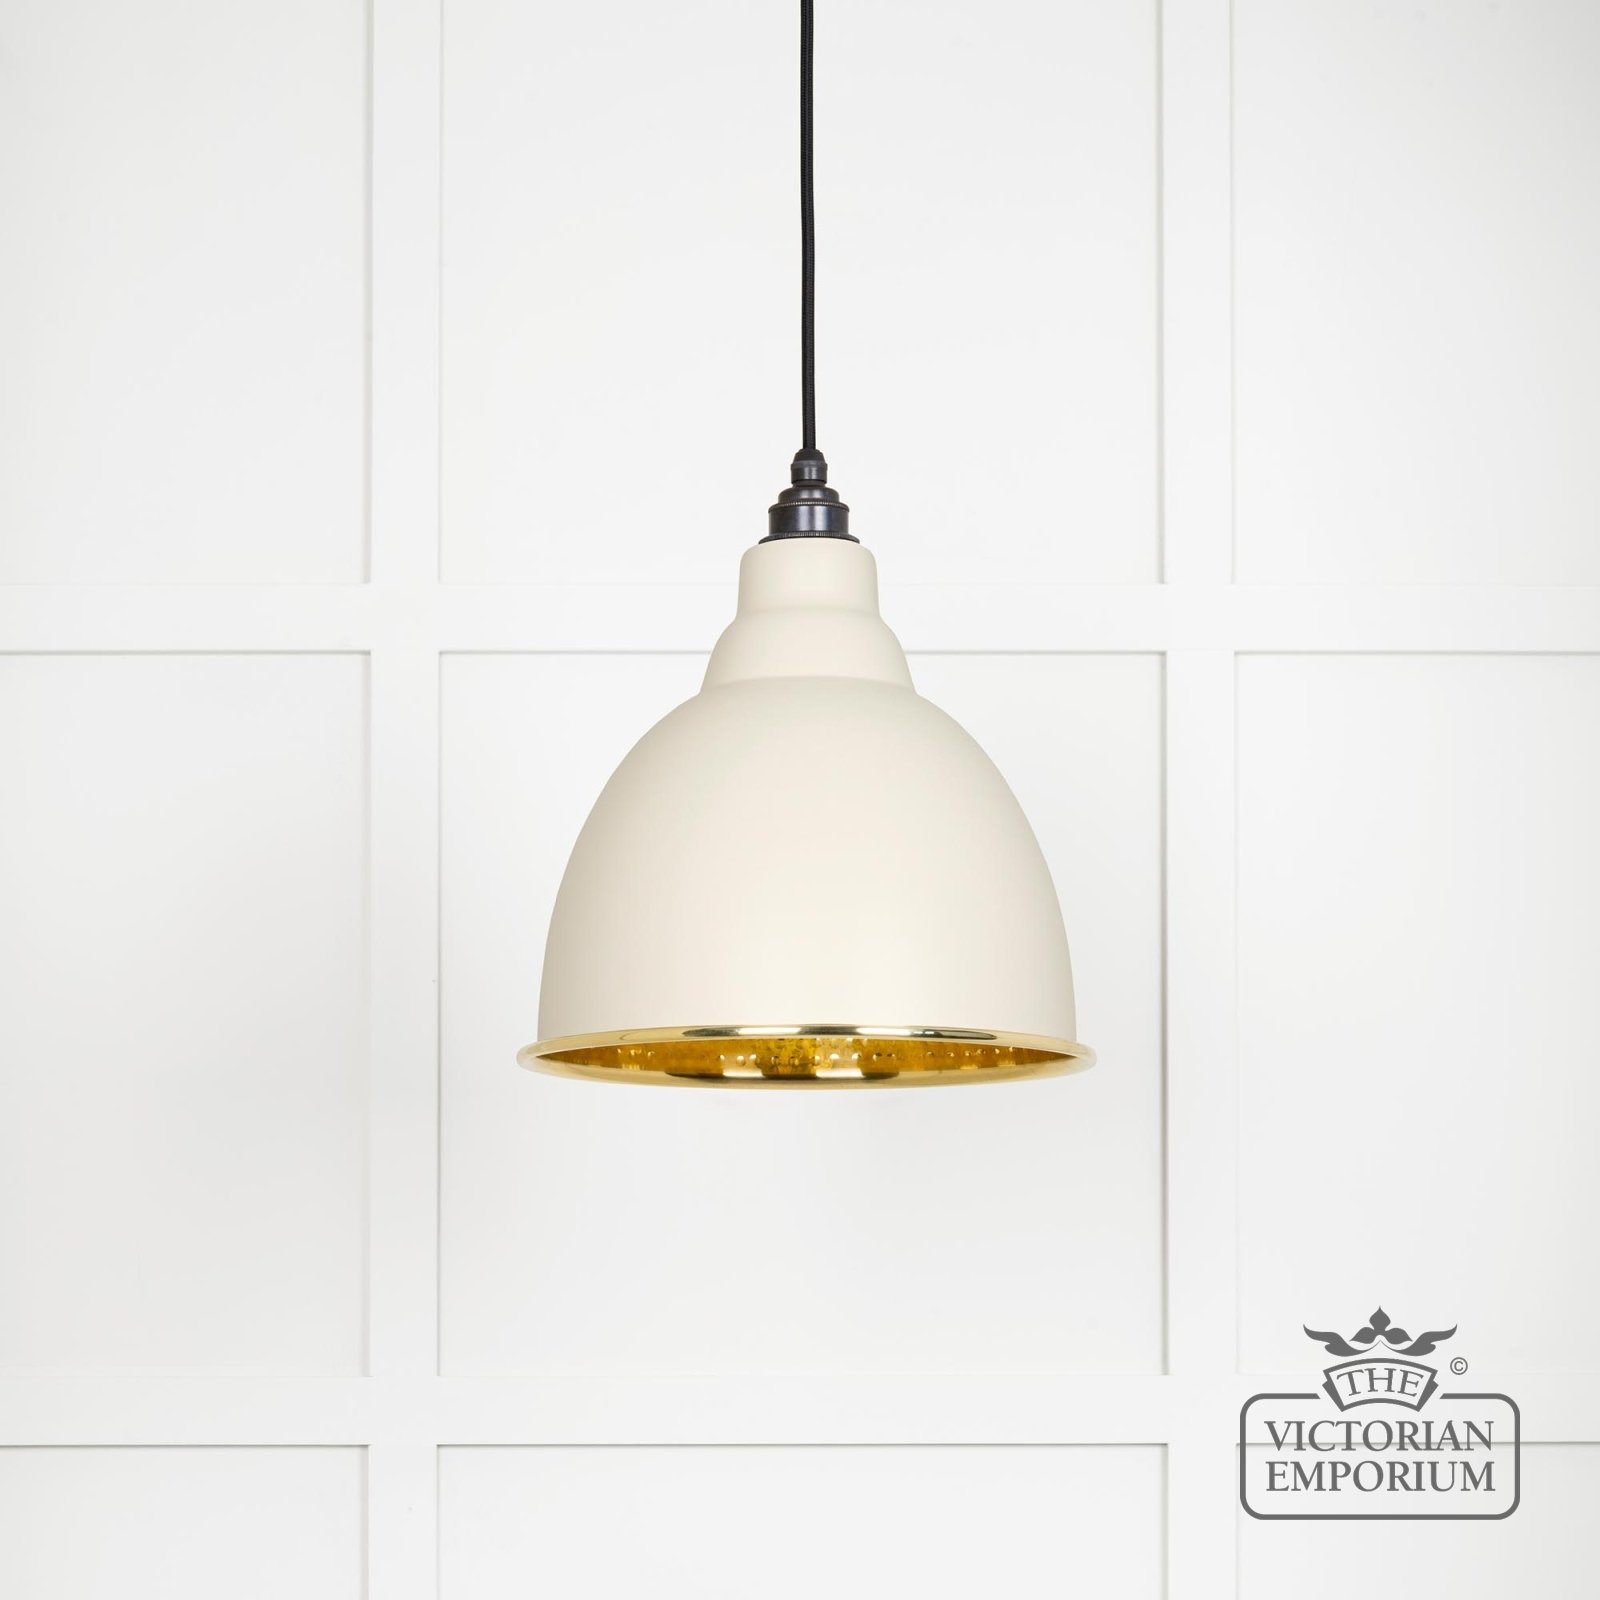 Brindle pendant light in Teasel with hammered brass interior